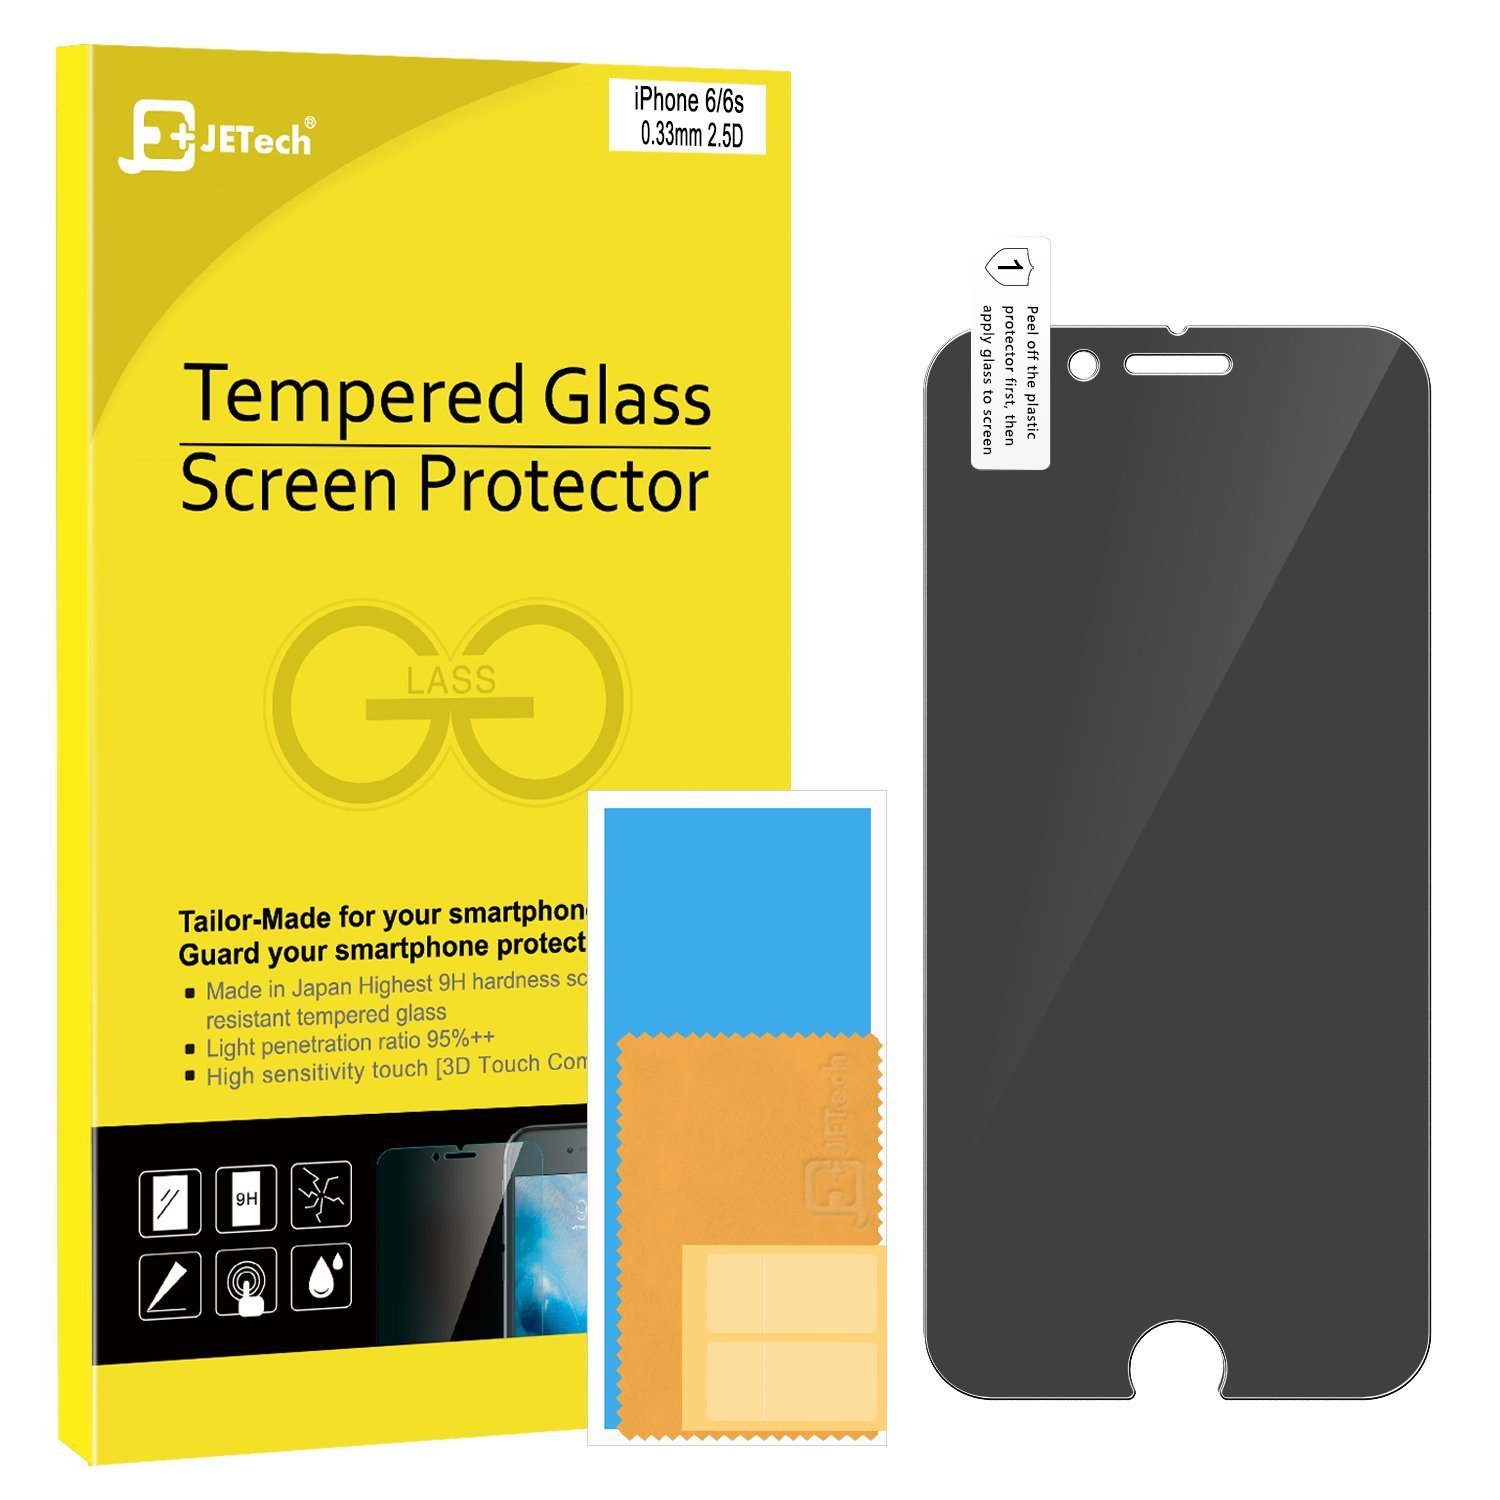 upscreen Spy Shield Clear Privacy Screen Protector for Canon PowerShot SX60 HS Multitouch Optimized self-Adhesive Privacy Protection 